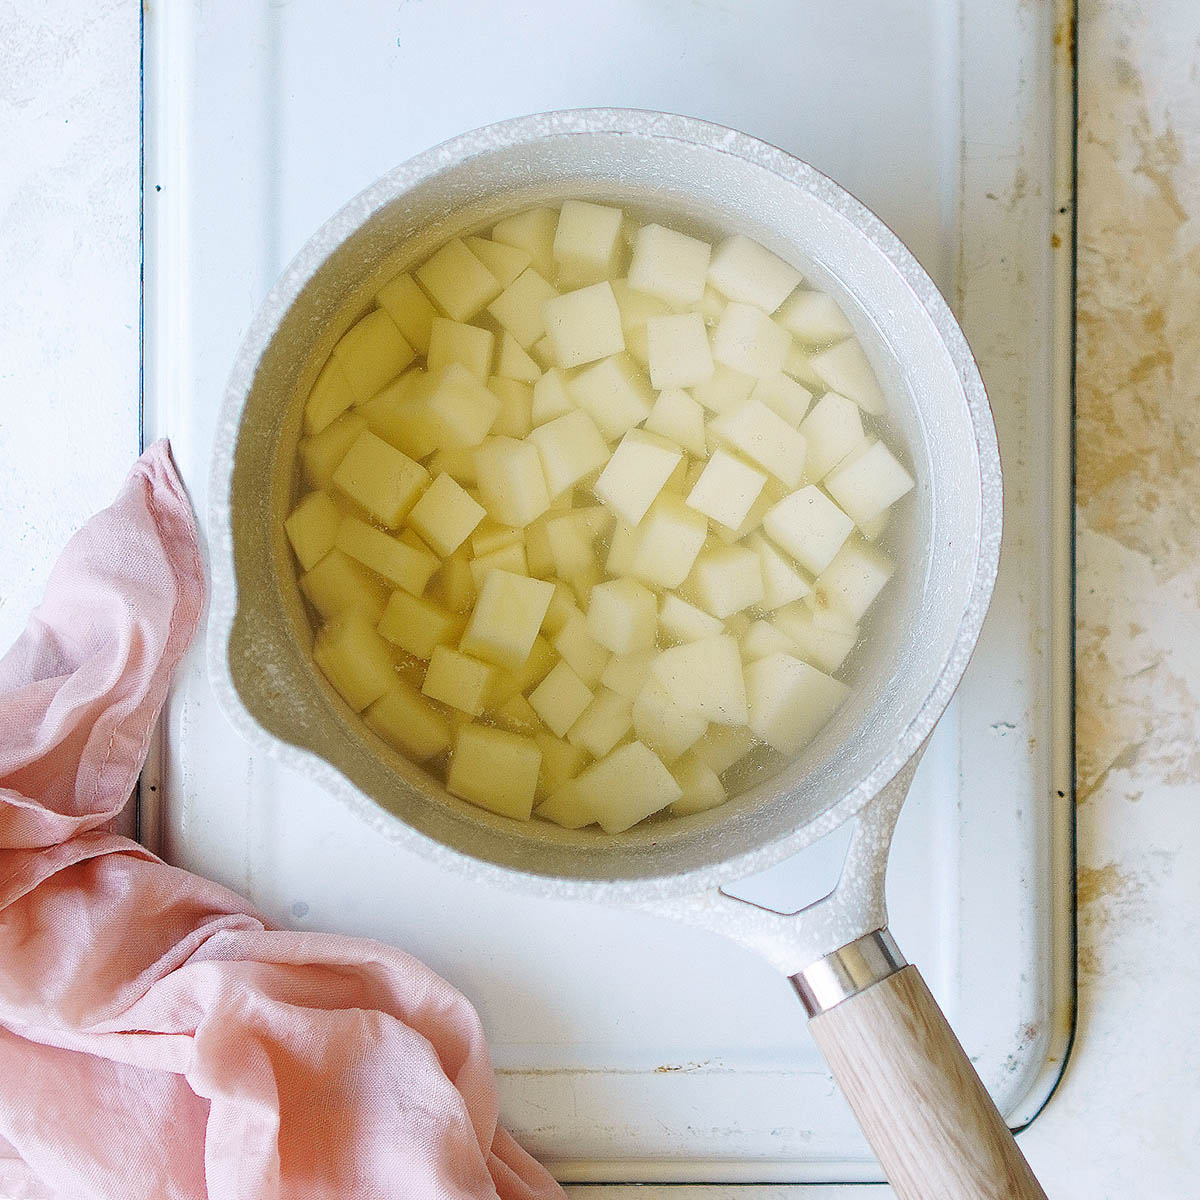 Cubed potatoes in a small saucepan with water. and then being drained on paper towels.